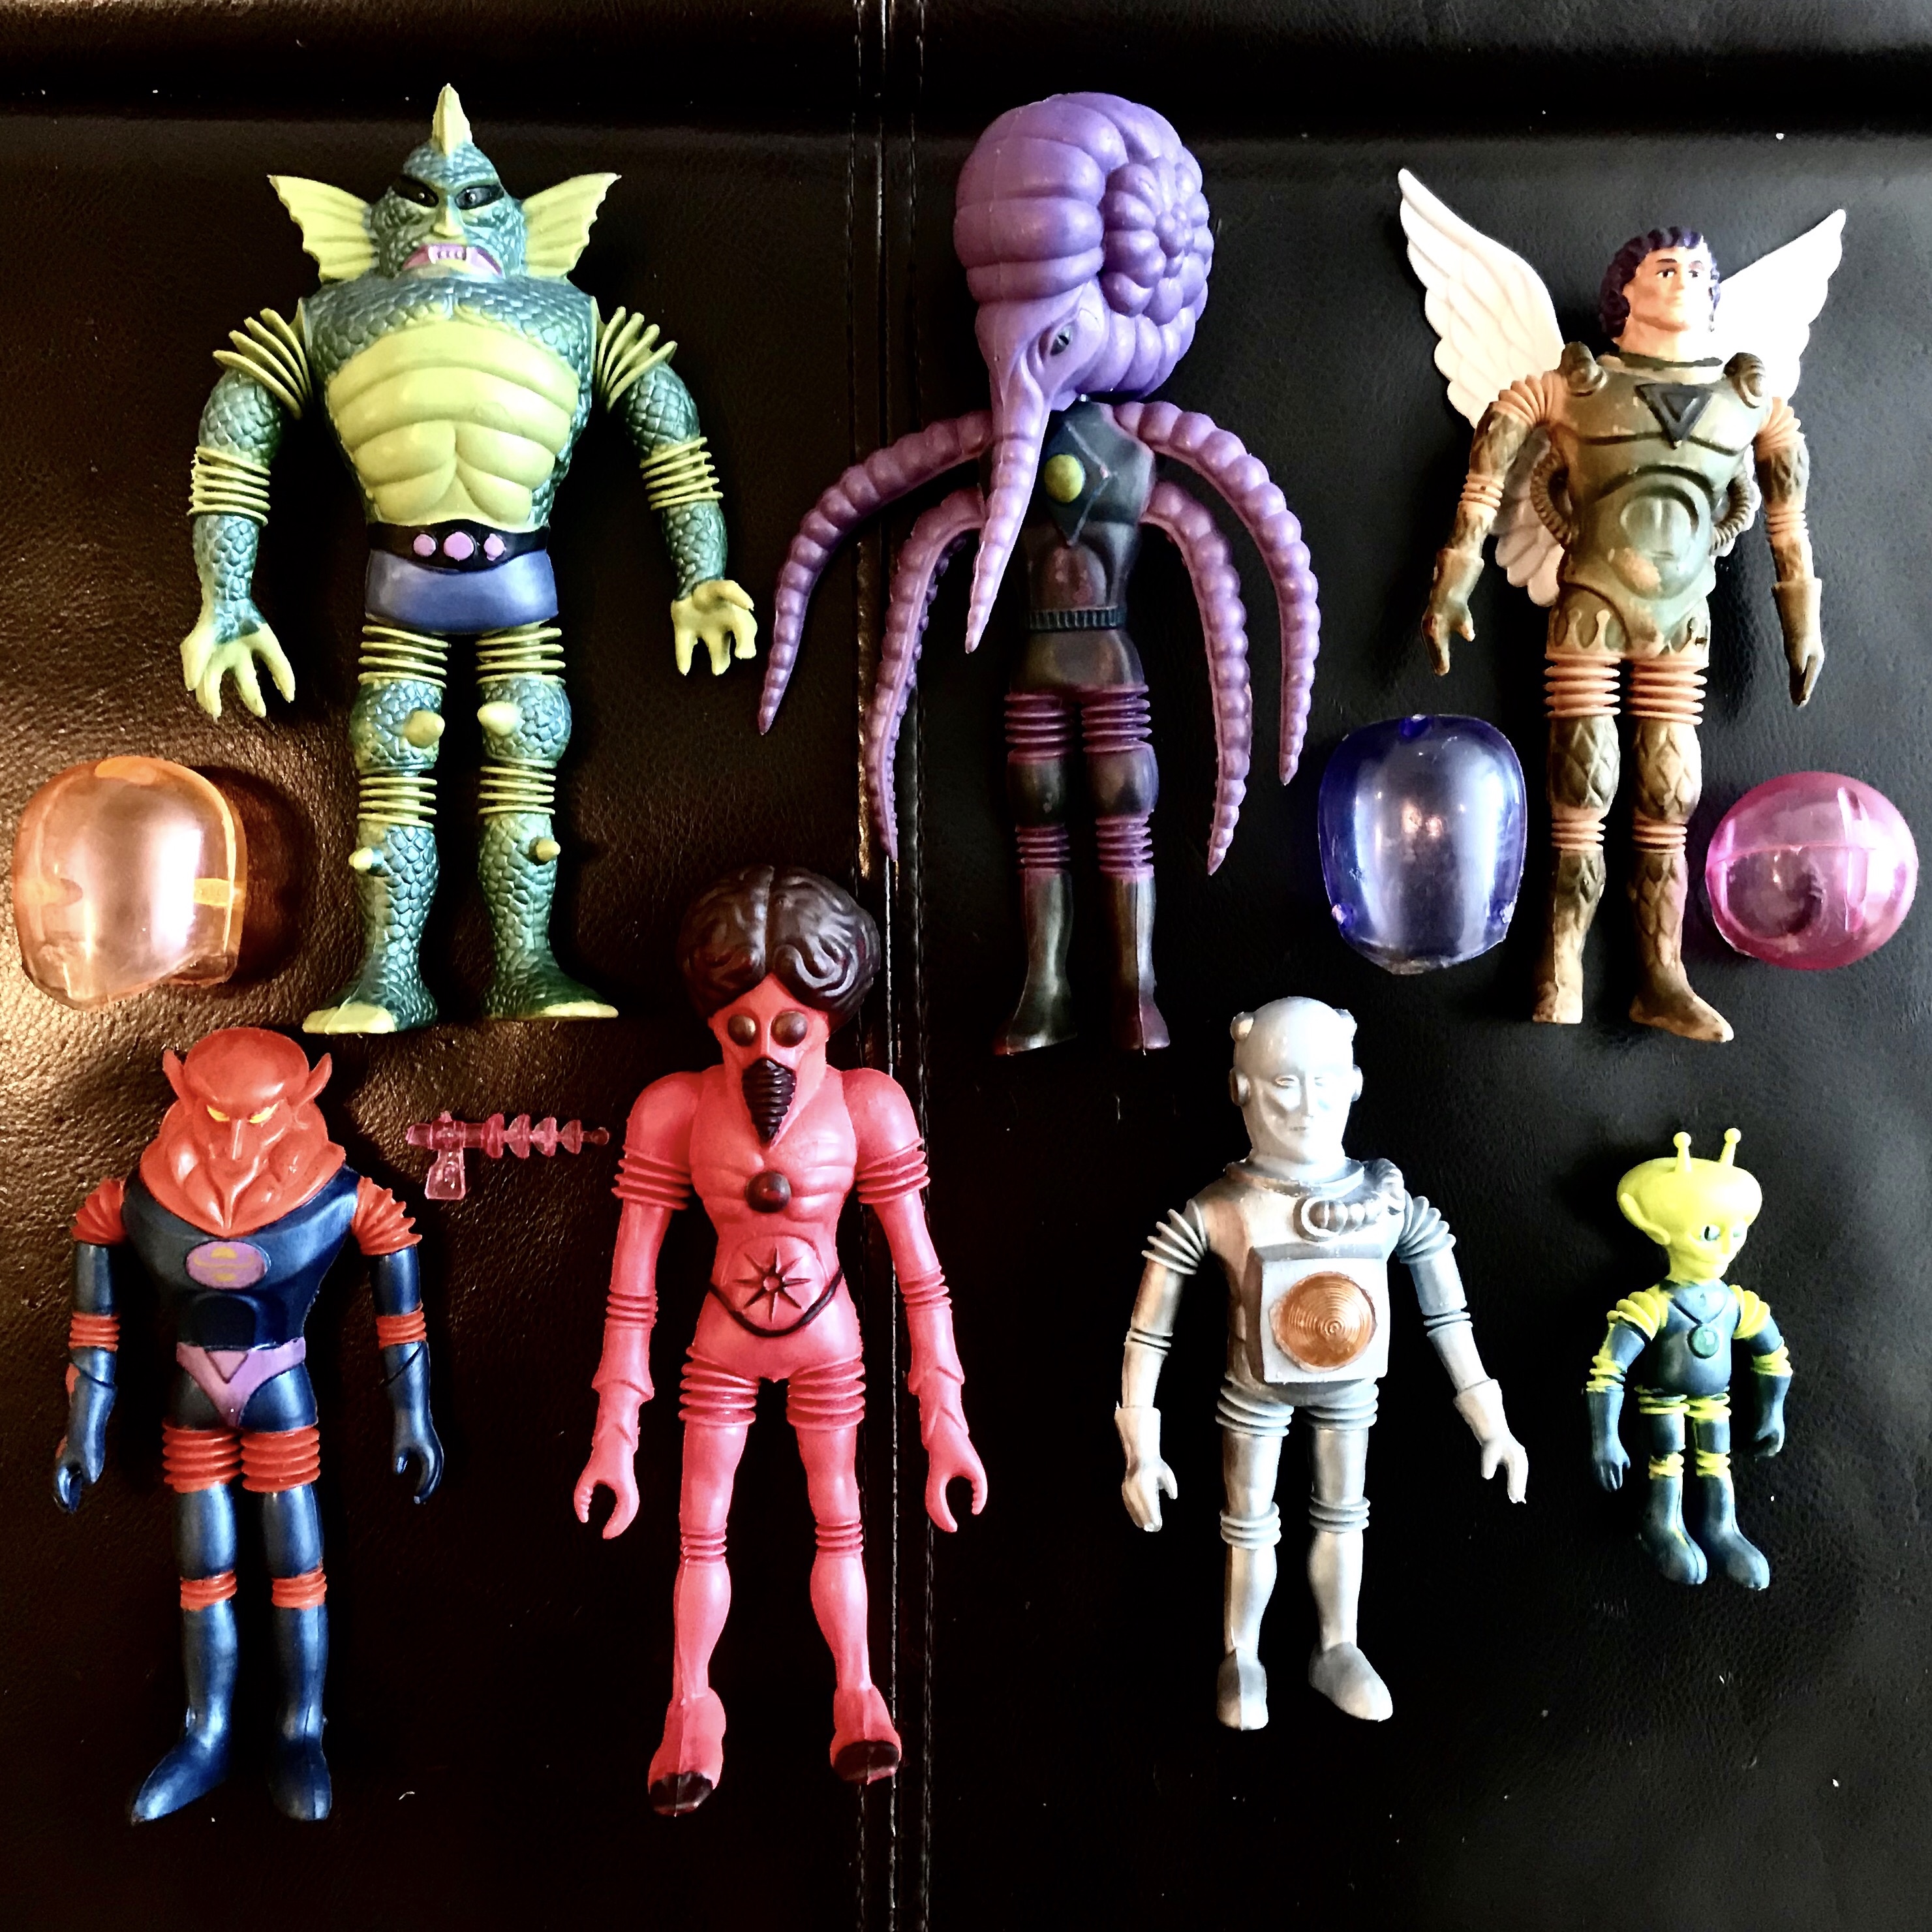 COLORFORMS OUTER SPACE MEN NEW INFINITY CARDED 2018 ZERO GRAVITY WITH GLOW SUIT 